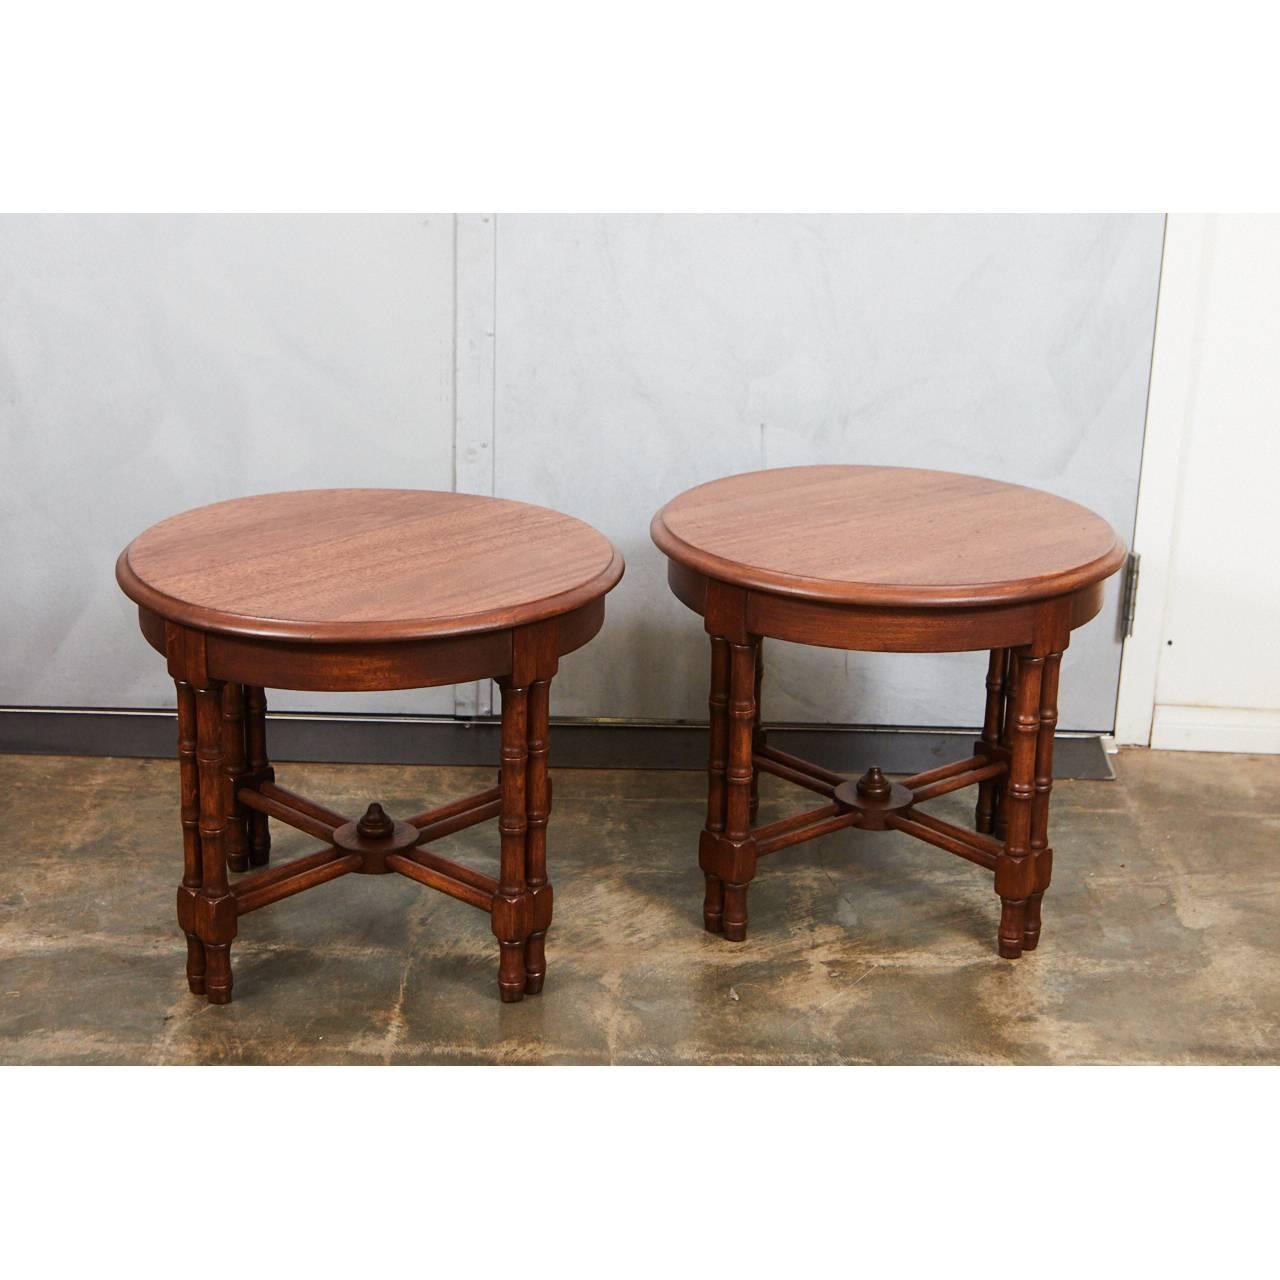 These beautiful walnut side tables are of a good size and shape for multiple uses. They have simple, modern design details that are a variation on the faux bamboo techniques of earlier periods.

